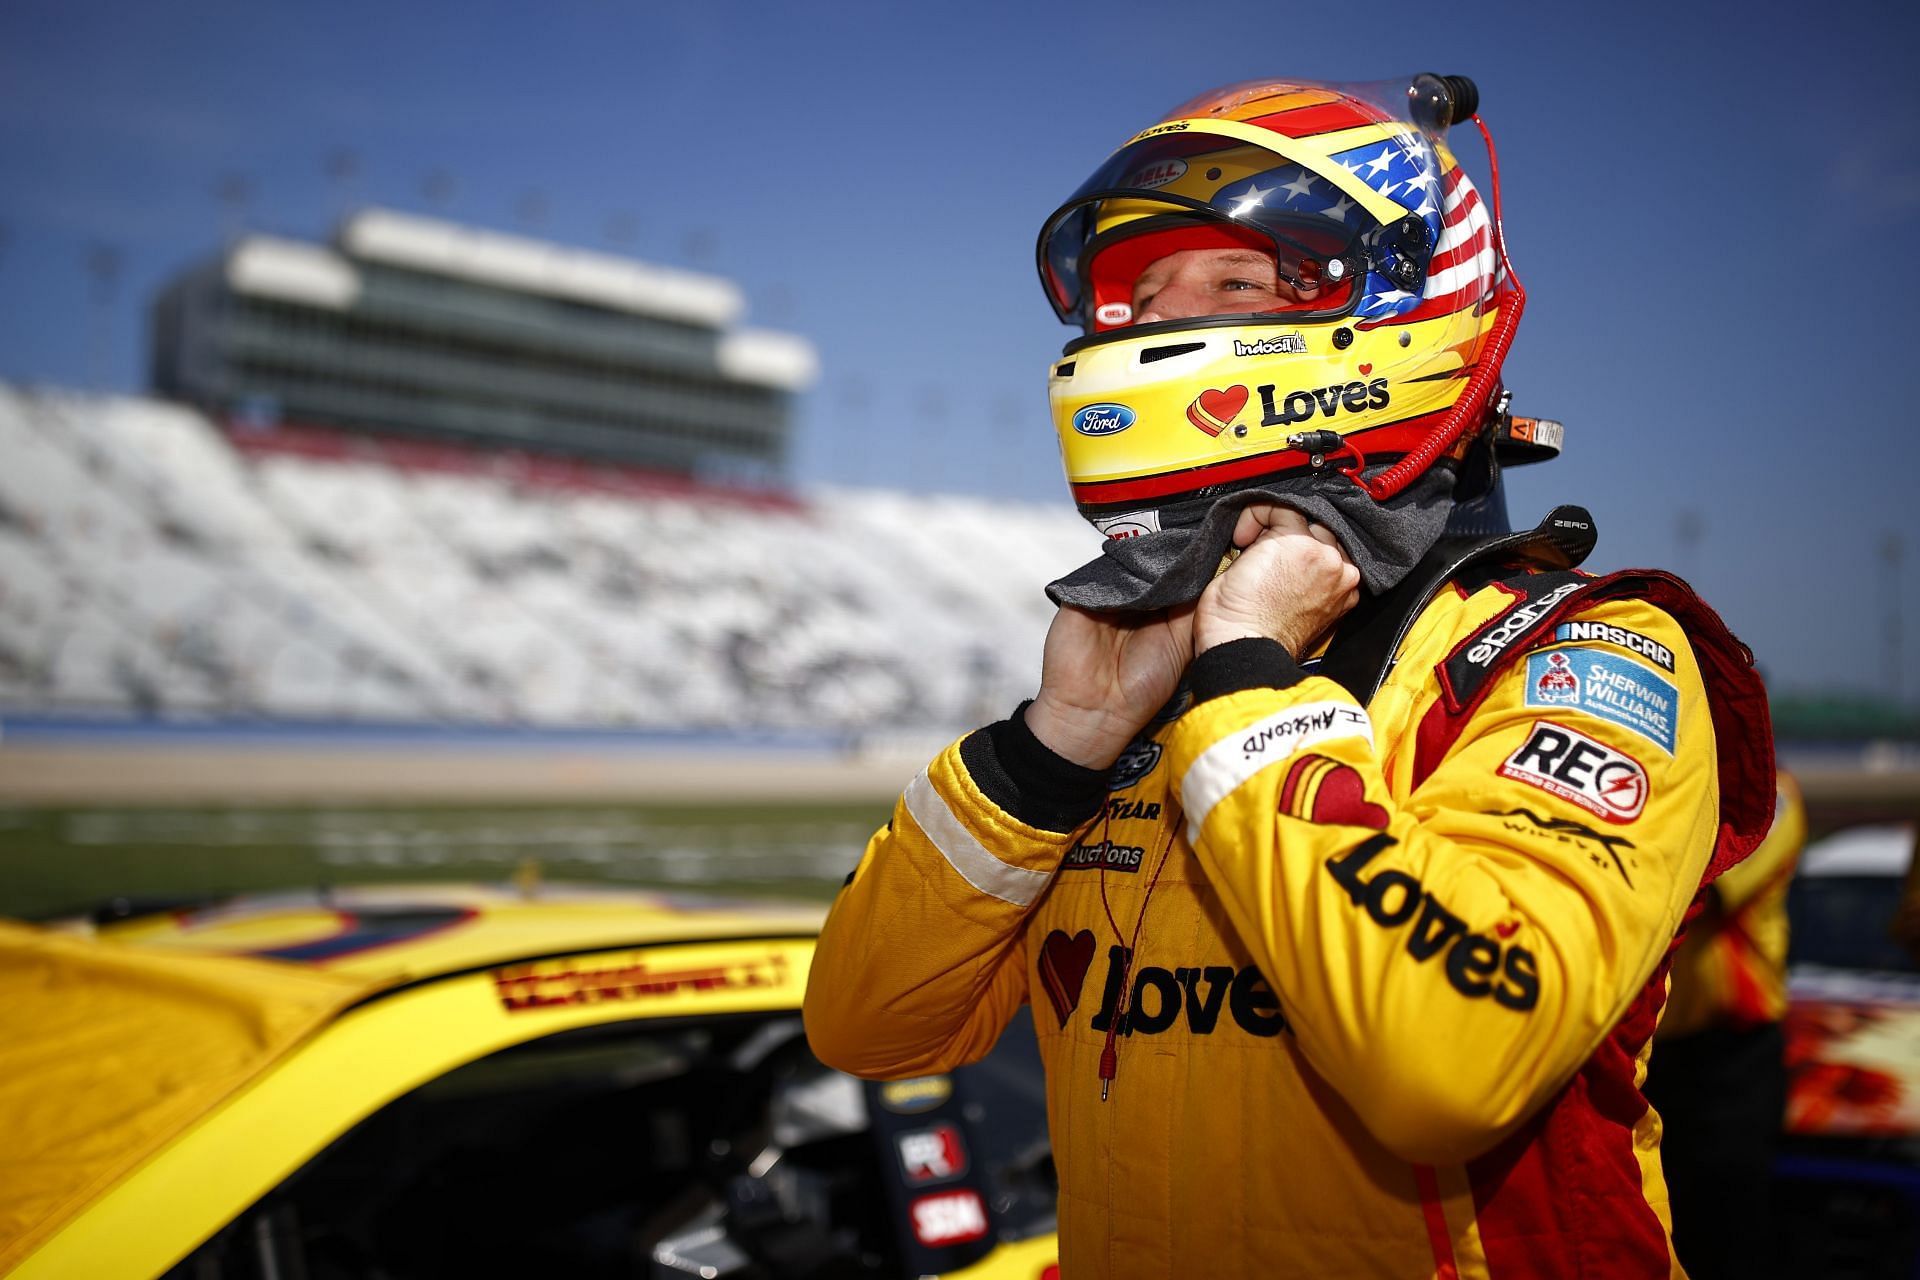 Michael McDowell at the NASCAR Cup Series Ally 400 Qualifying last year (Photo by Jared C. Tilton/Getty Images)